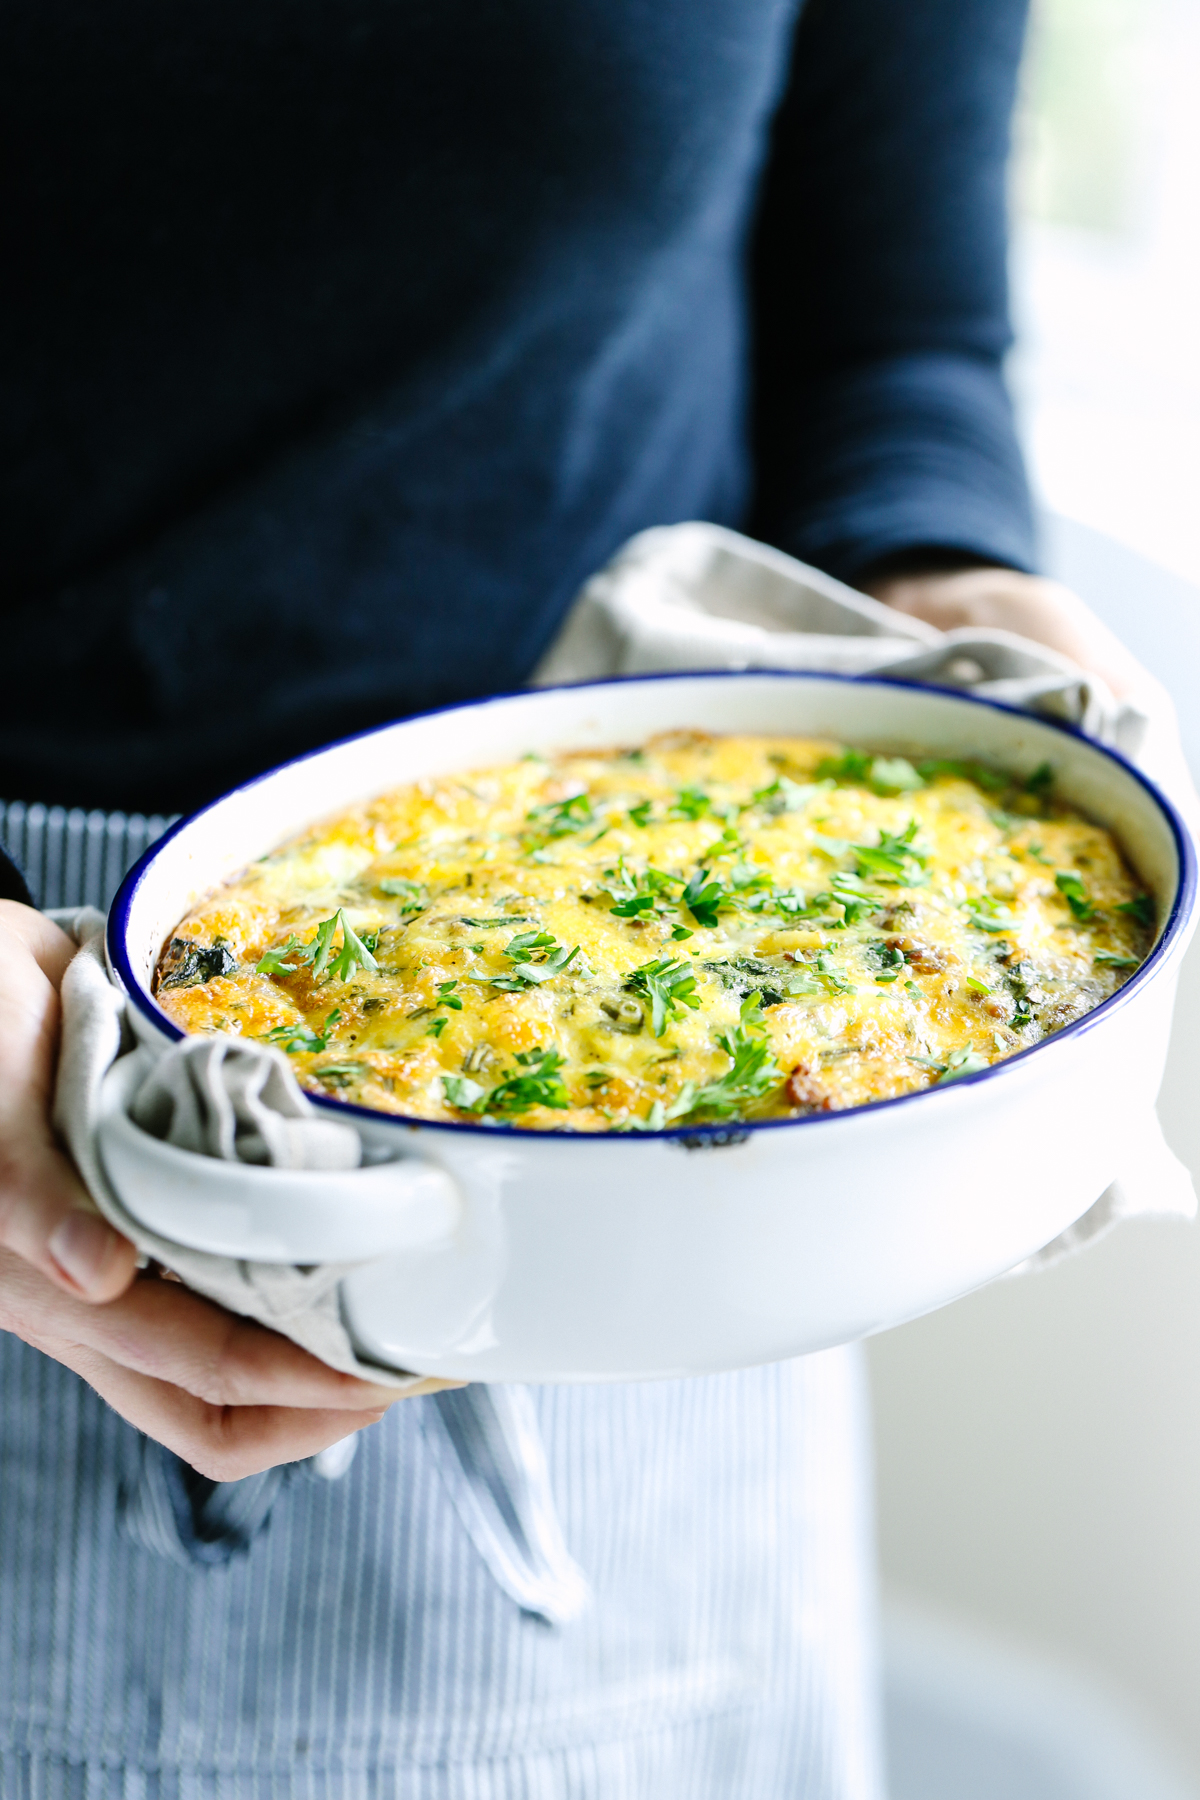 Egg casserole baked in a casserole dish with parsley sprinkled on top..